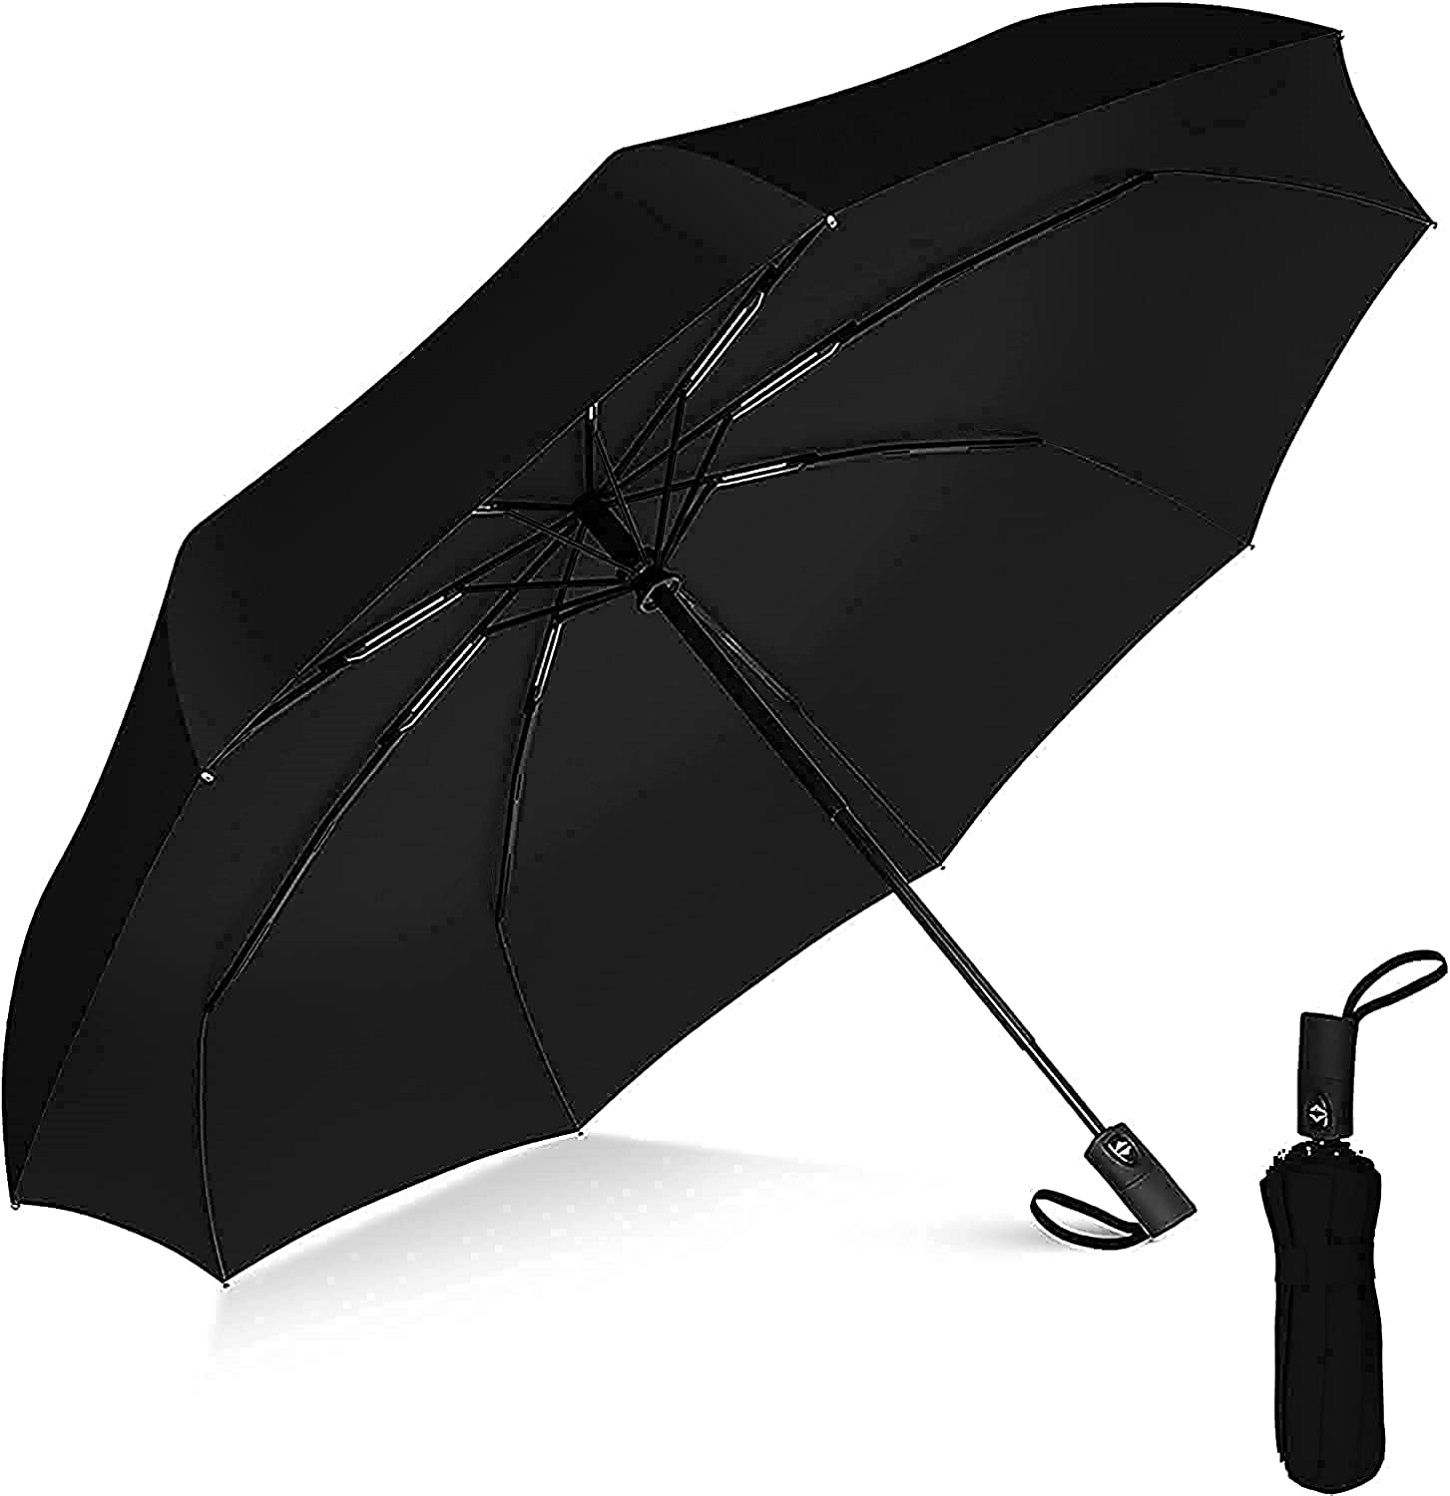     			GEEO Umbrella for Auto Open Close Lightweight Umbrella for Men 3 Fold Umbrella for Rain Windproof Compact Automatic Strong Steel Shalf Perfect for Car Purse Black Color